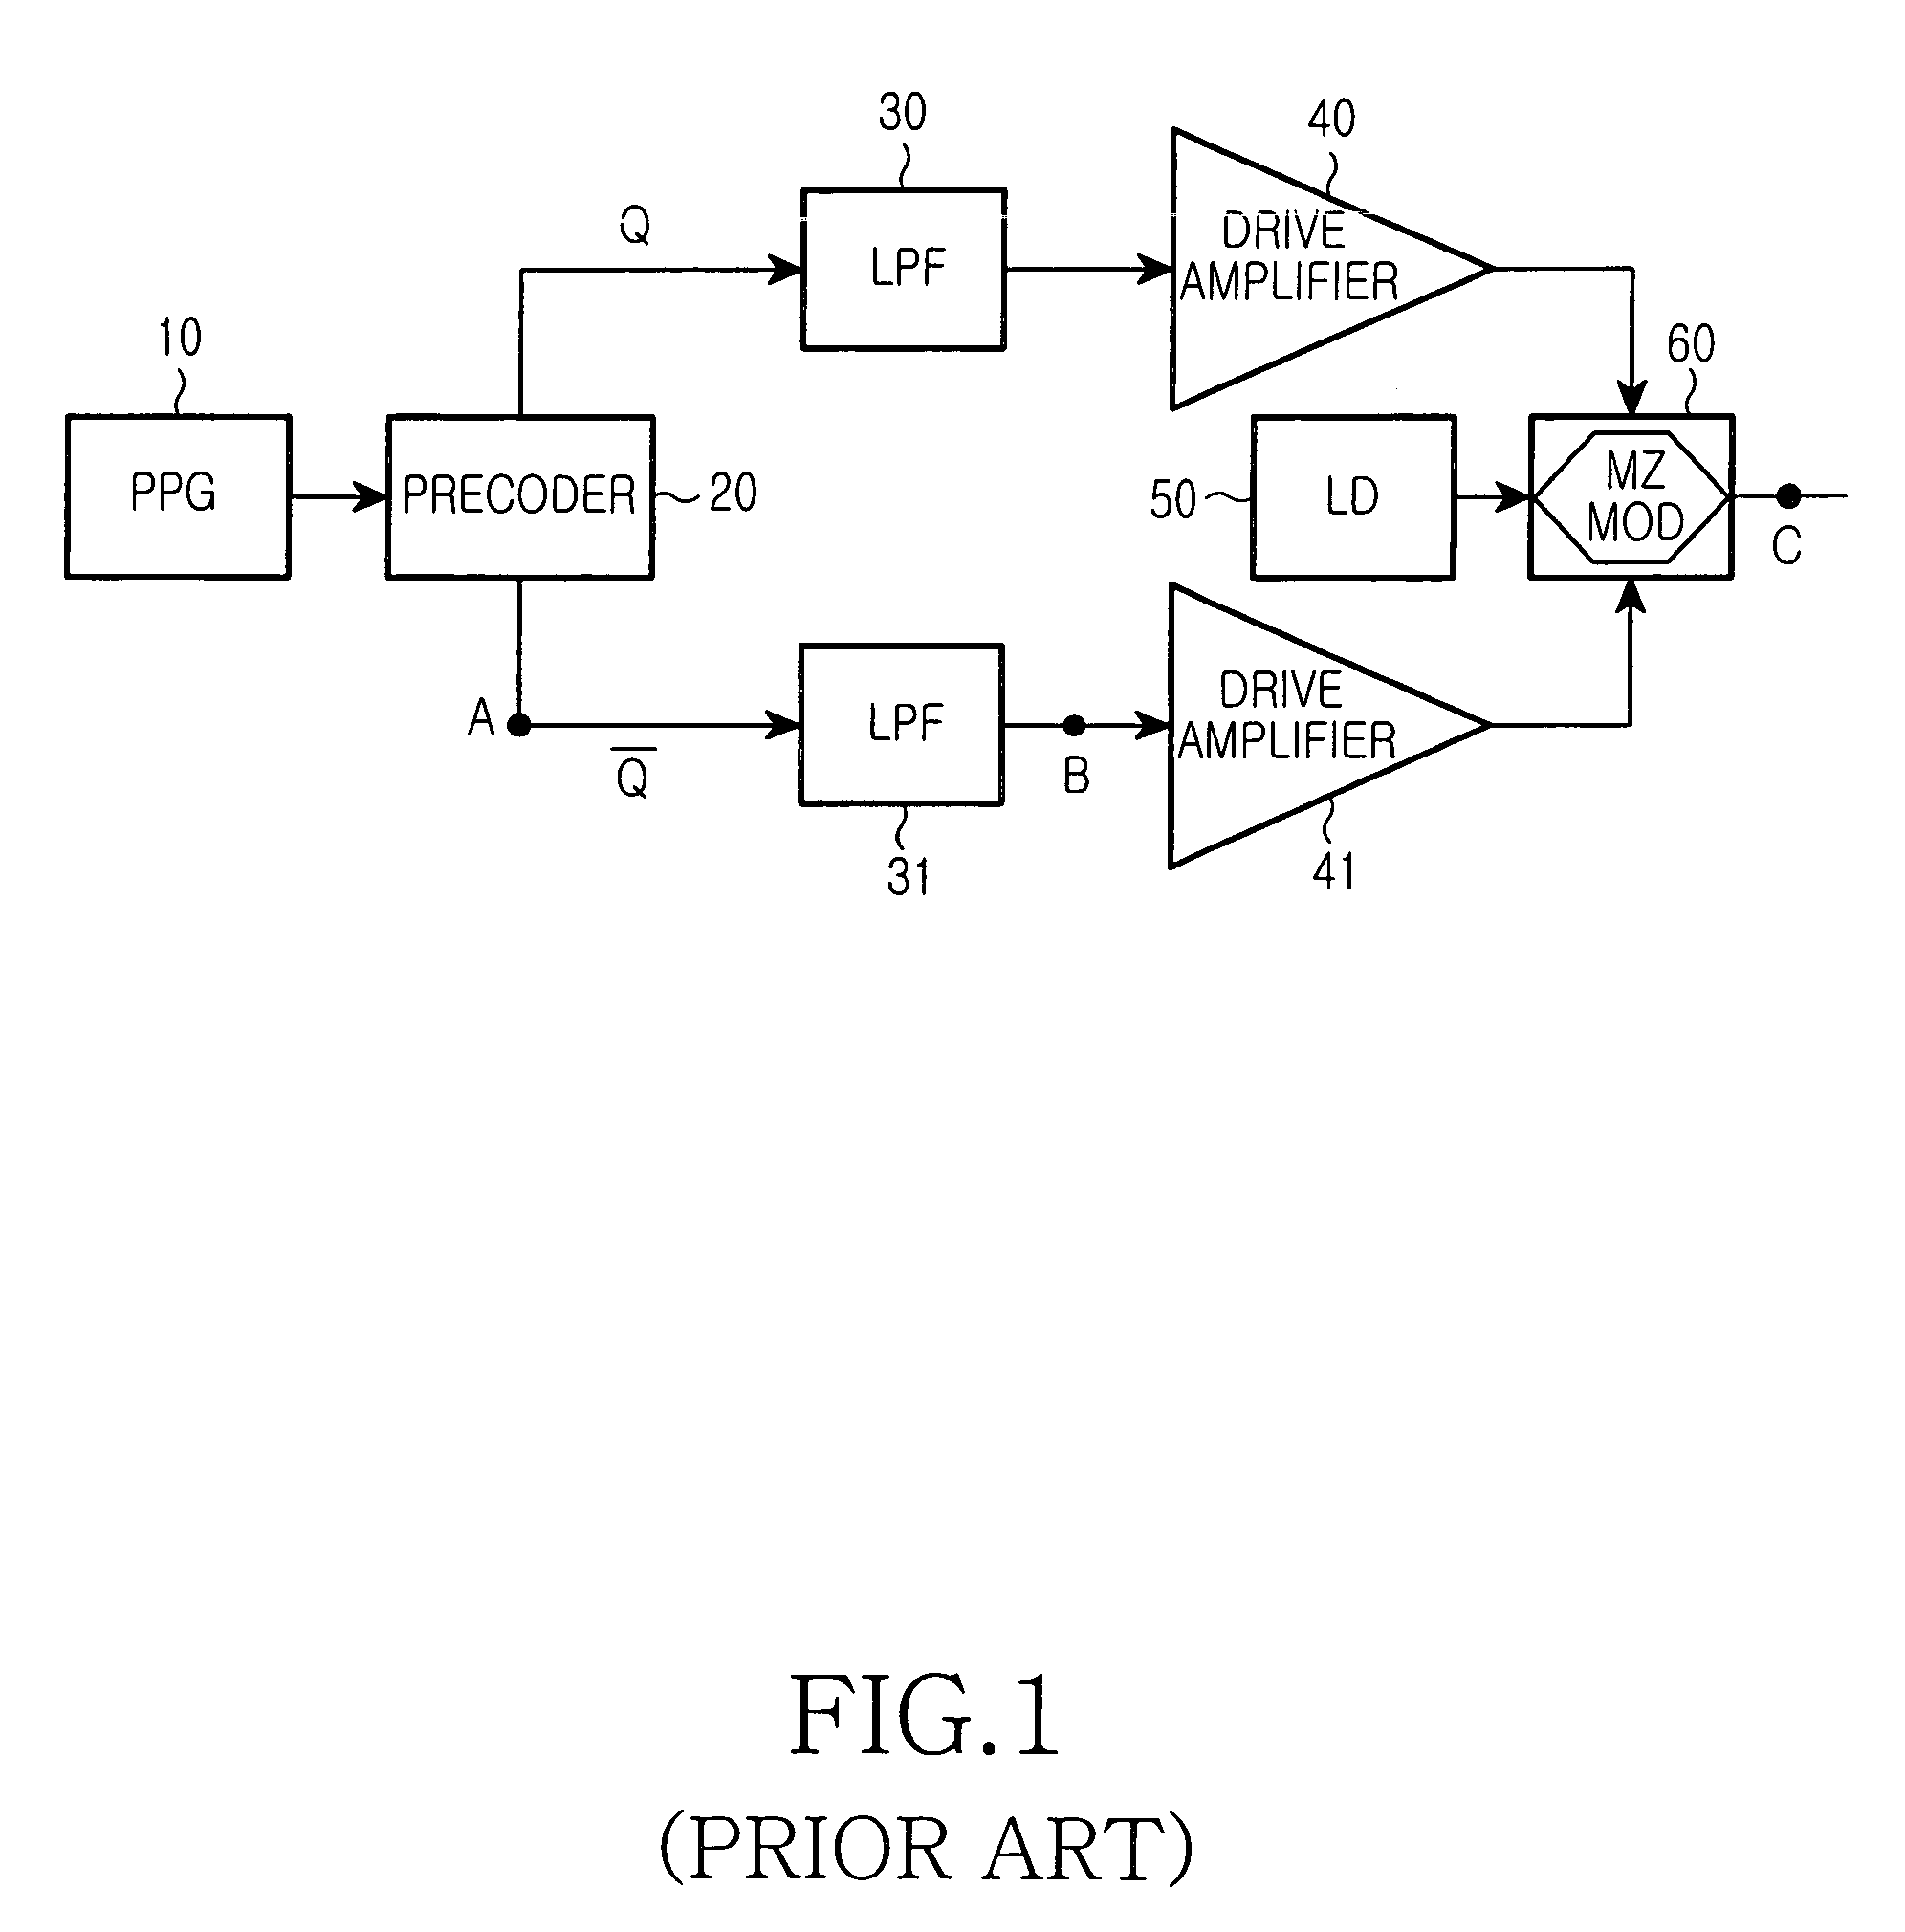 Duobinary optical transmission device using at least one semiconductor optical amplifier